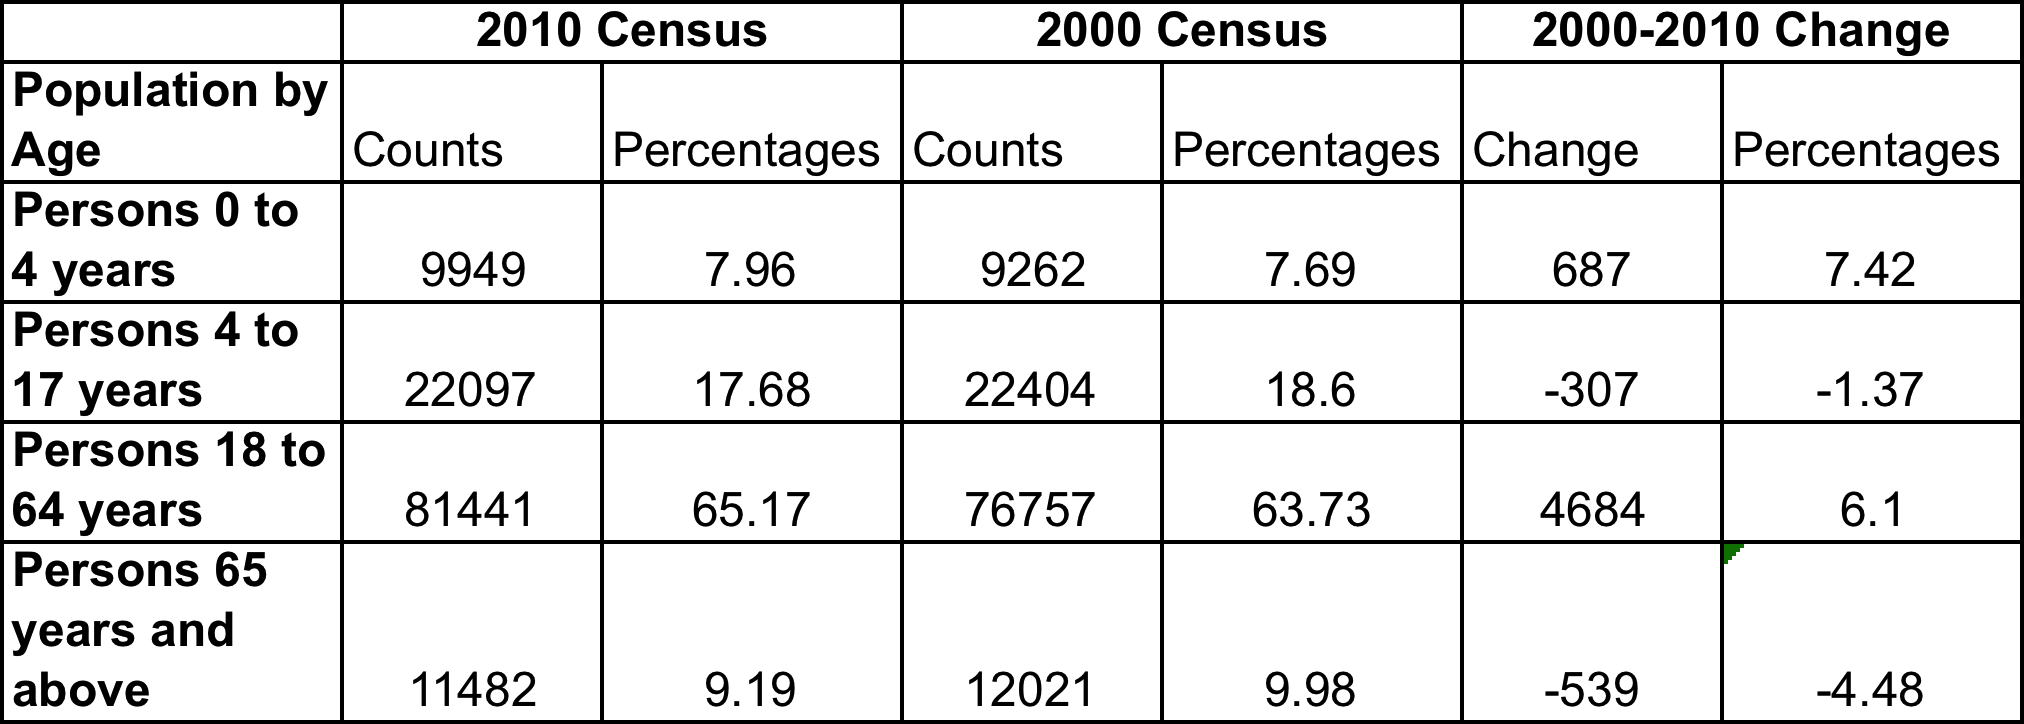 Age Distribution in Elizabeth, NJ according to 2000, and 2010 Census 